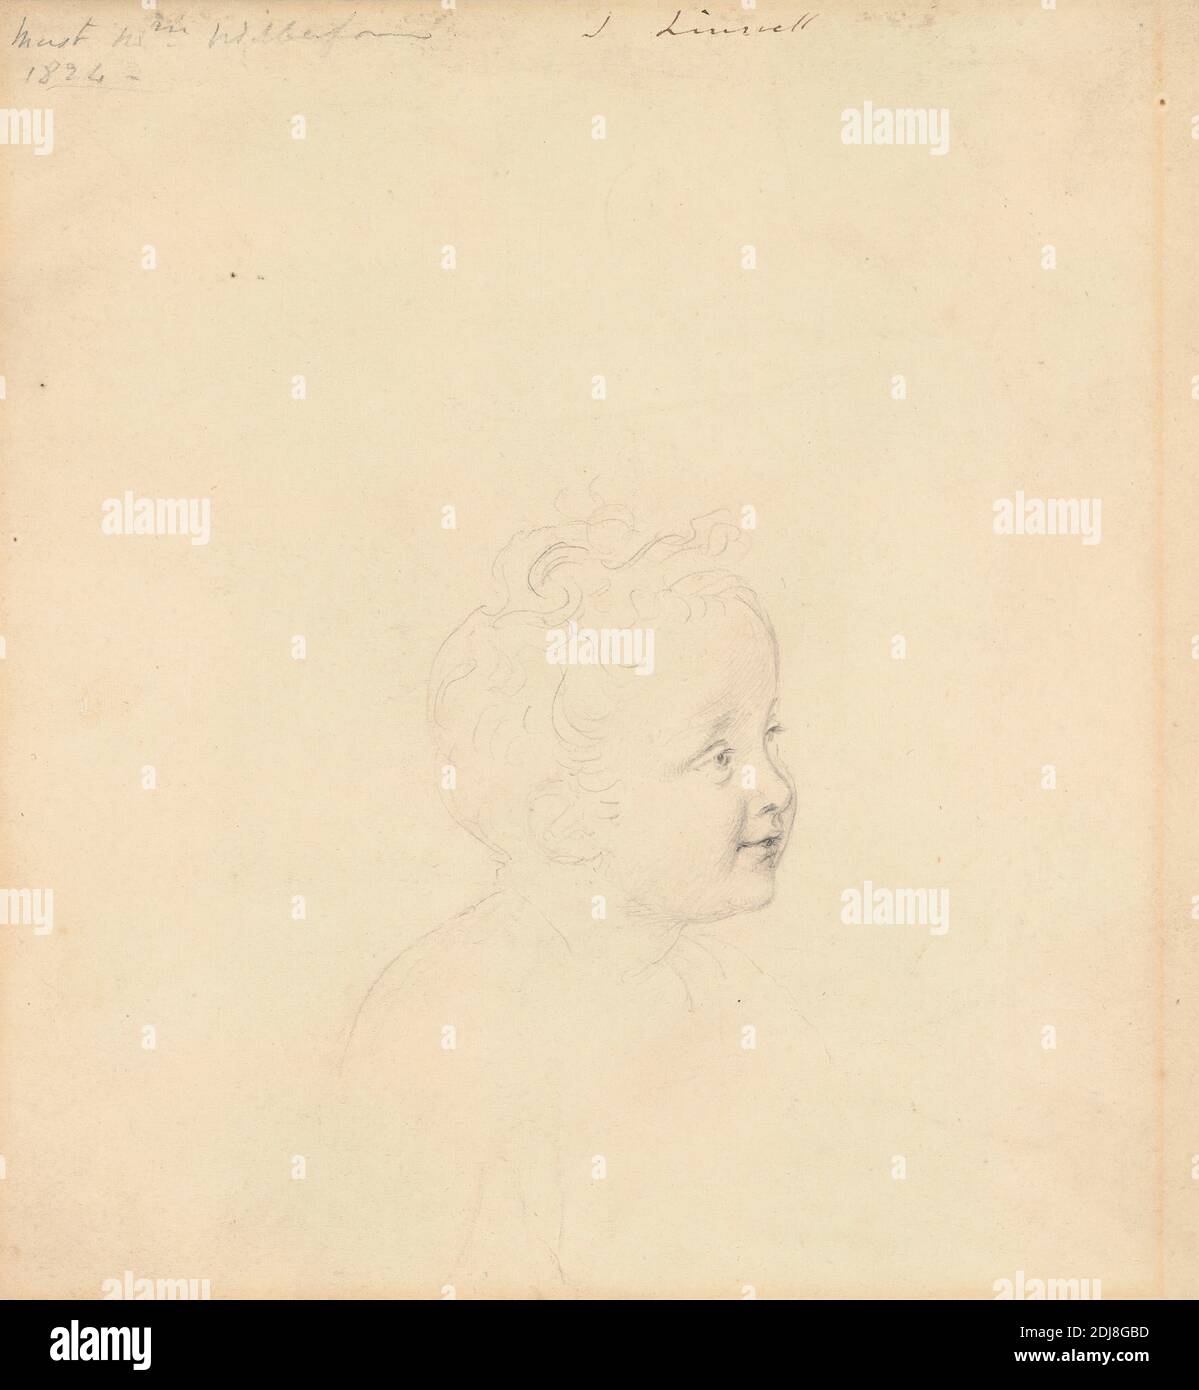 Study for Master William Wilberforce, John Linnell, 1792–1882, British, 1824, Graphite on moderately thick, slightly textured, beige wove paper, Sheet: 6 3/4 x 6 1/4 inches (17.1 x 15.9 cm), boy, child, figure study, gaze, portrait, study (visual work), youth Stock Photo